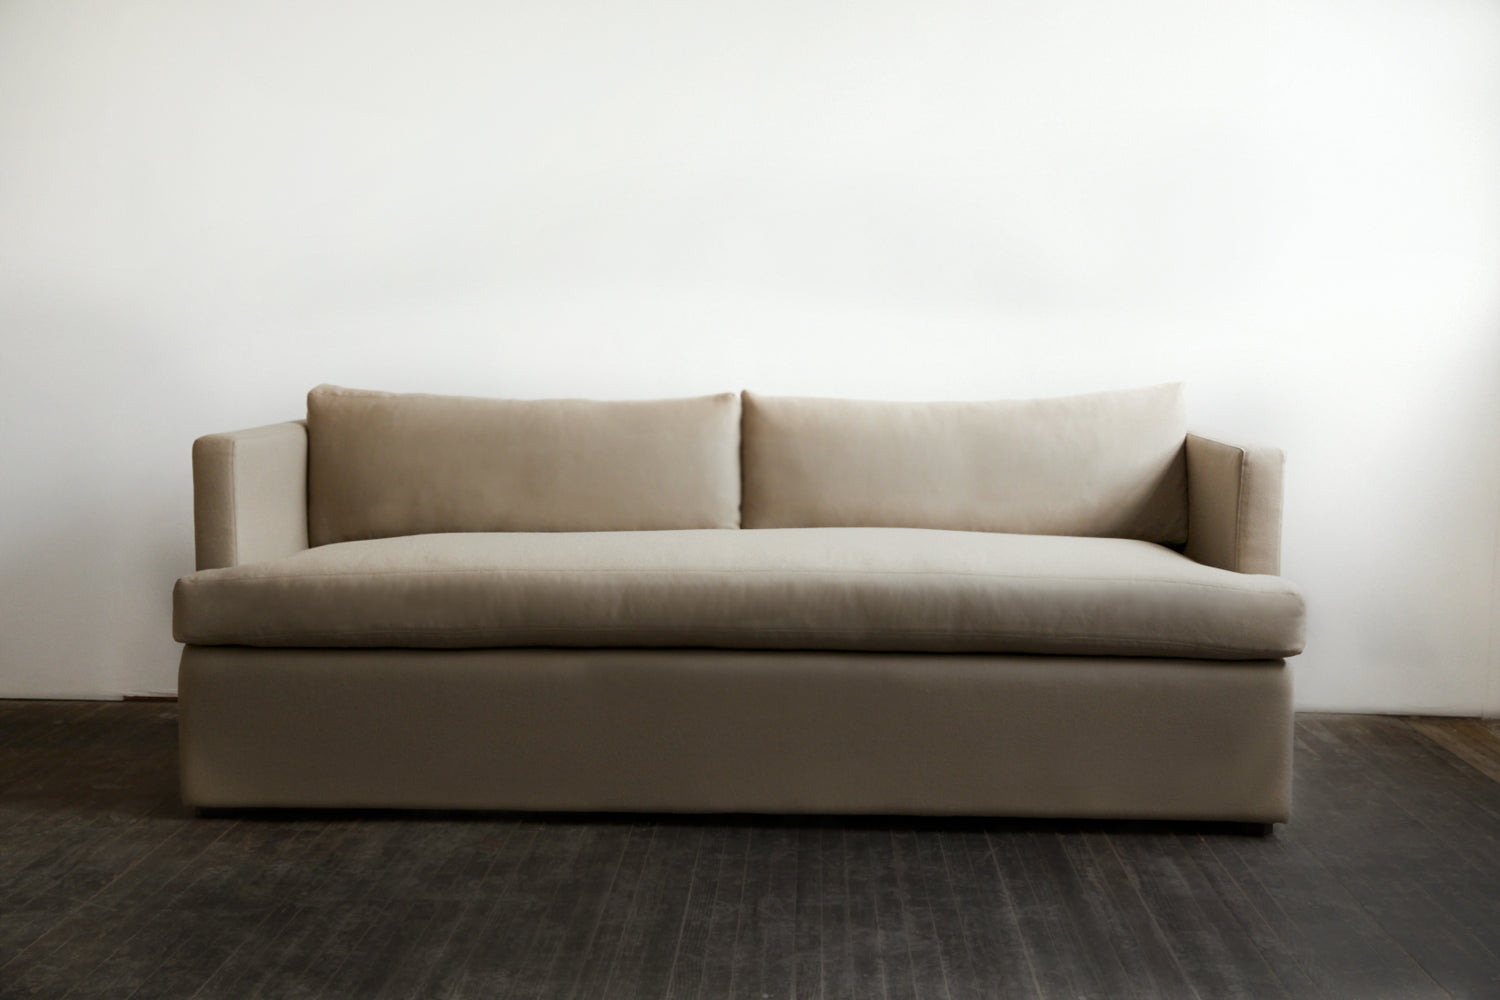 The Upholstered Sofa